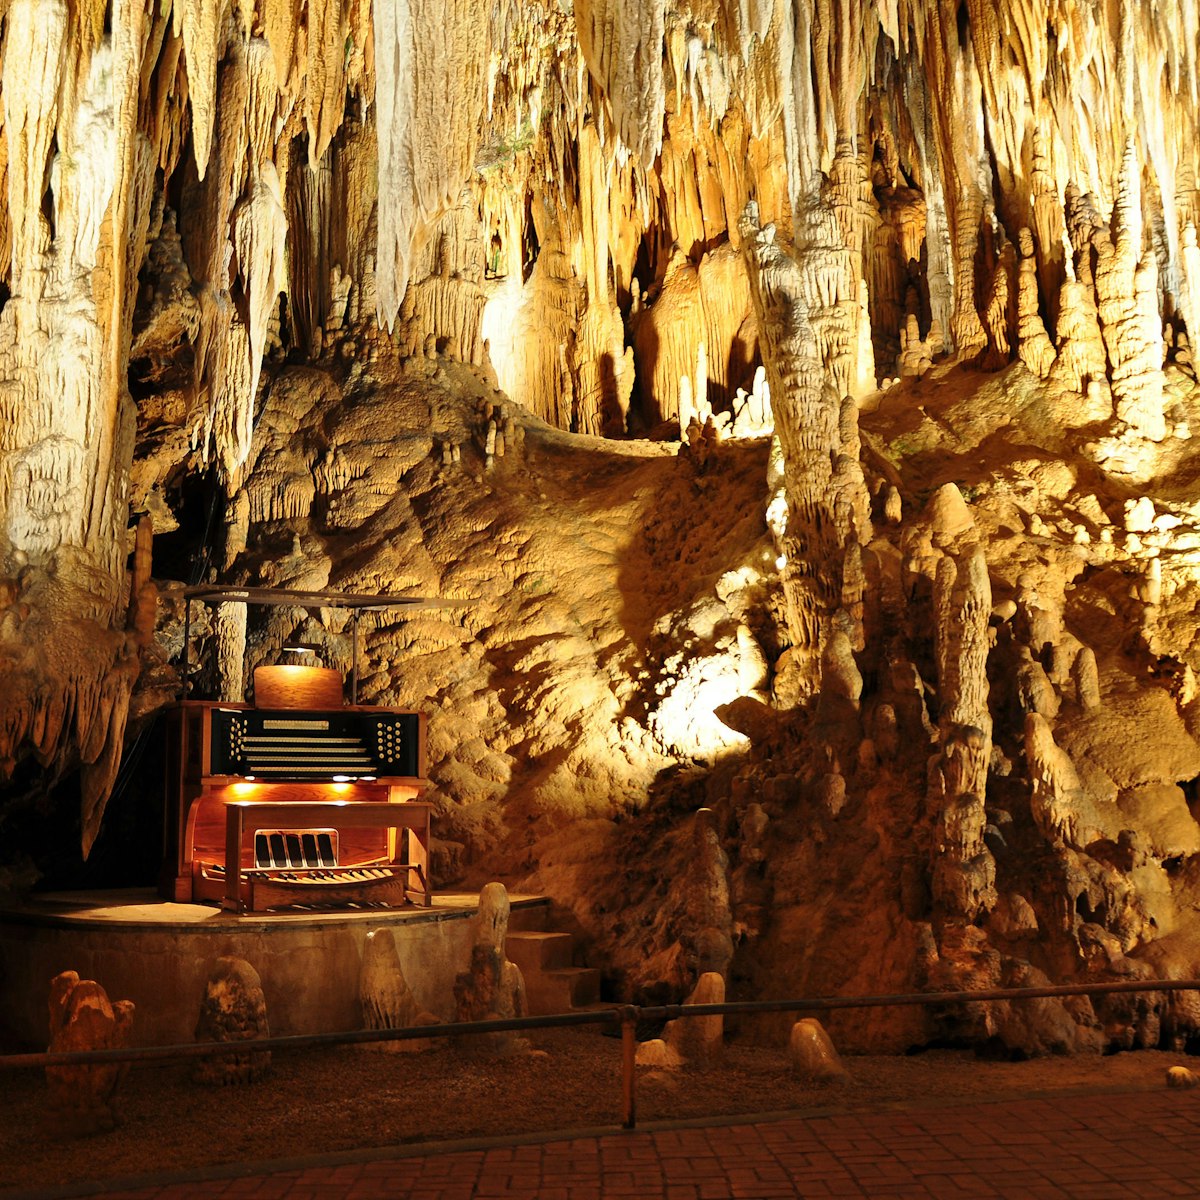 The Stalacpipe Organ in Luray Caverns.